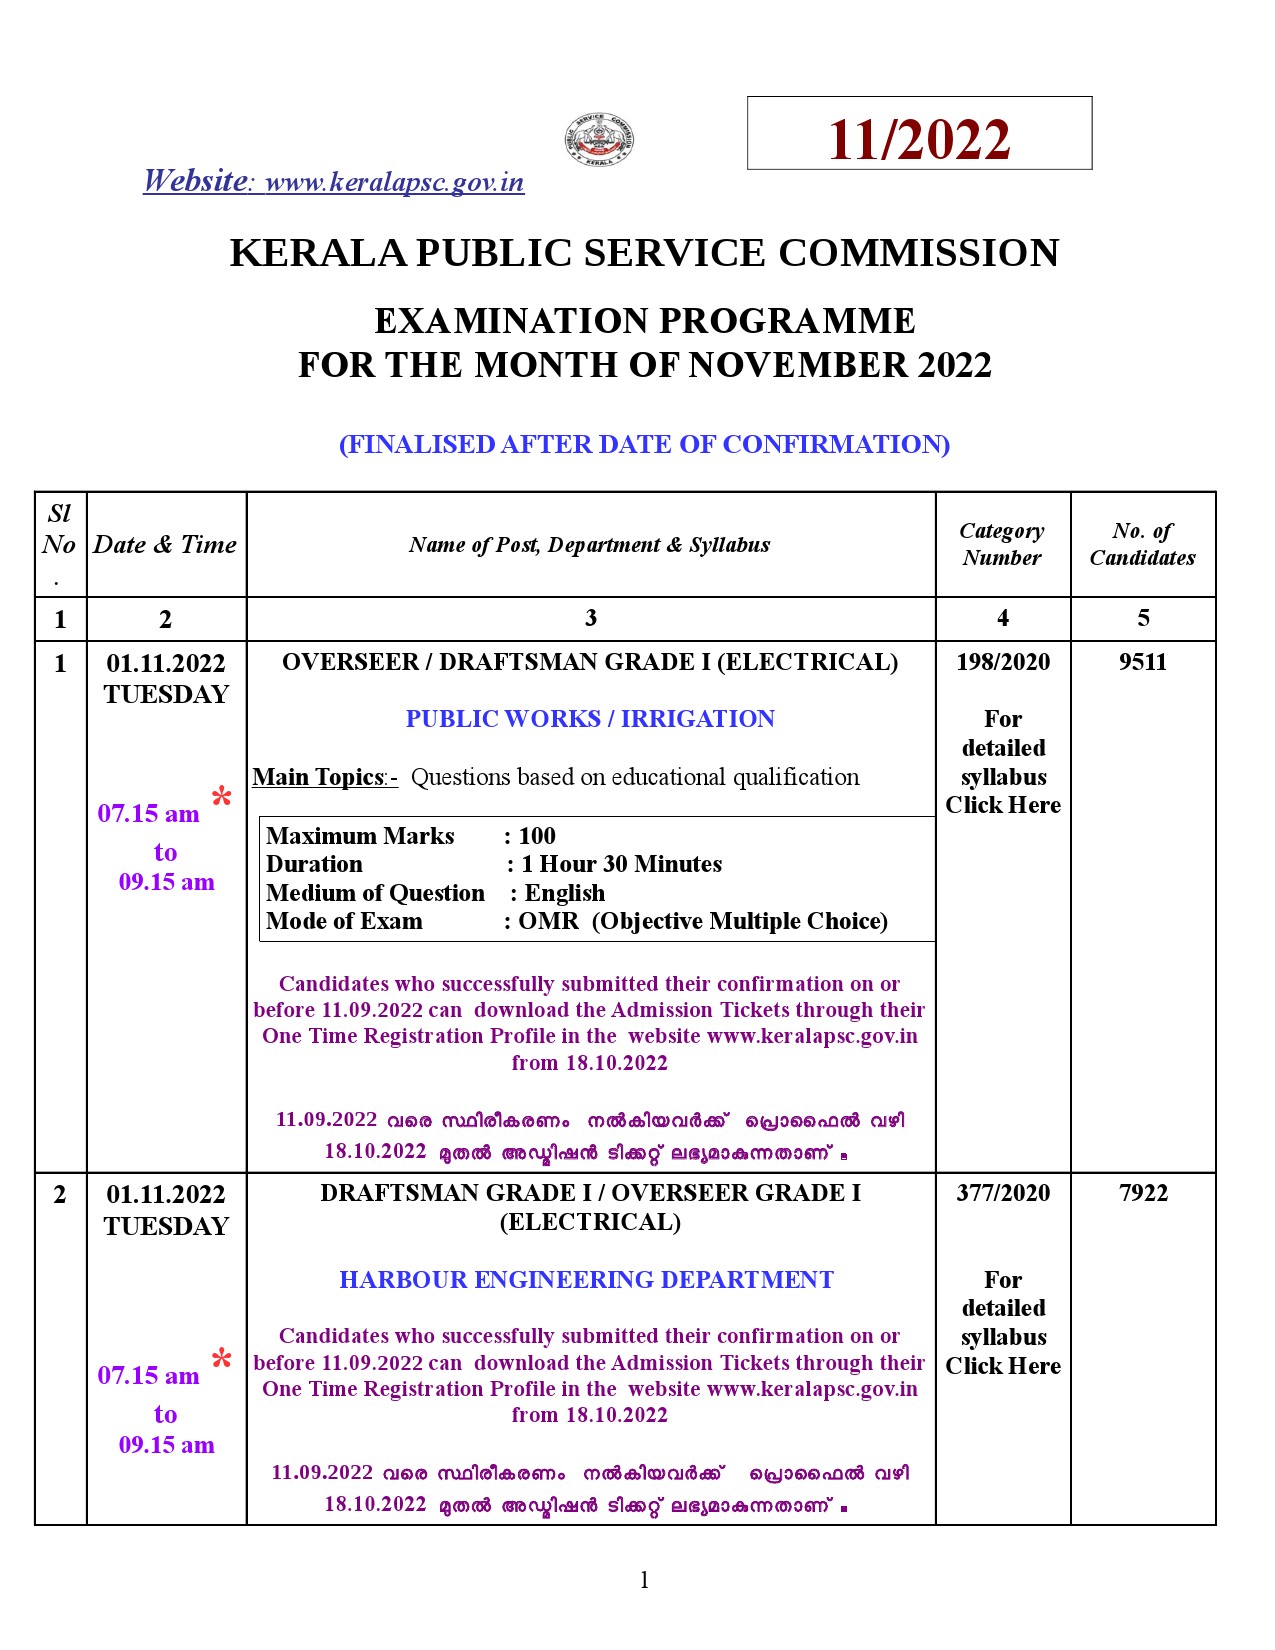 EXAMINATION PROGRAMME FOR THE MONTH OF NOVEMBER 2022 AFTER CONFIRMATION - Notification Image 1